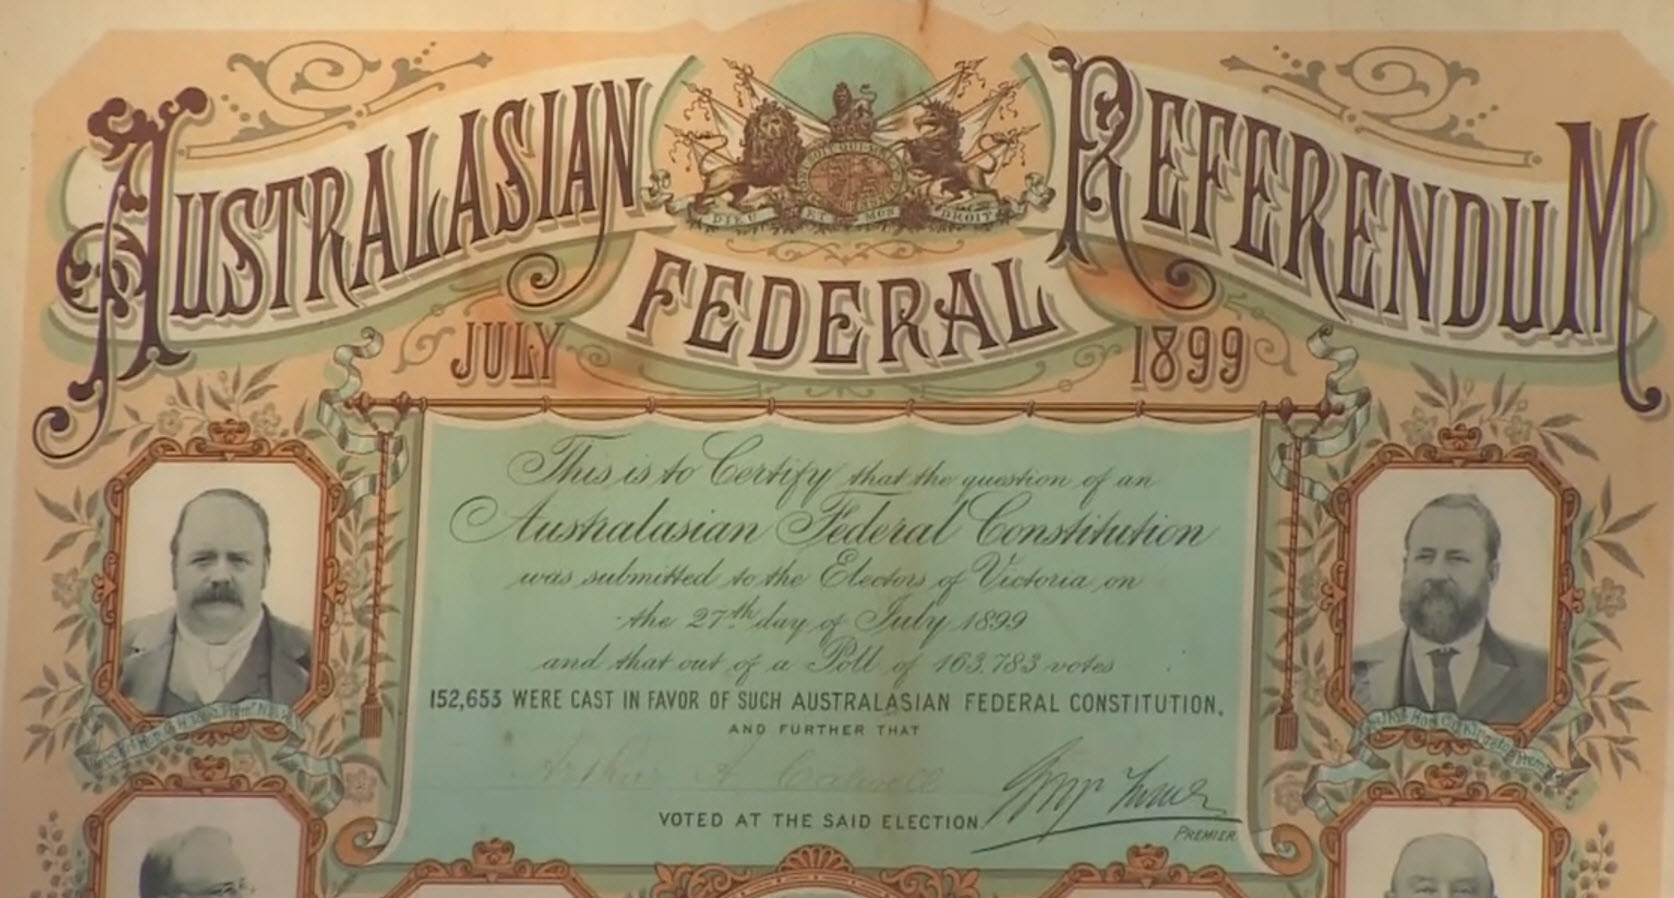 Certificate for voting at the Australasian Federal Referendum in Victoria, 1899.